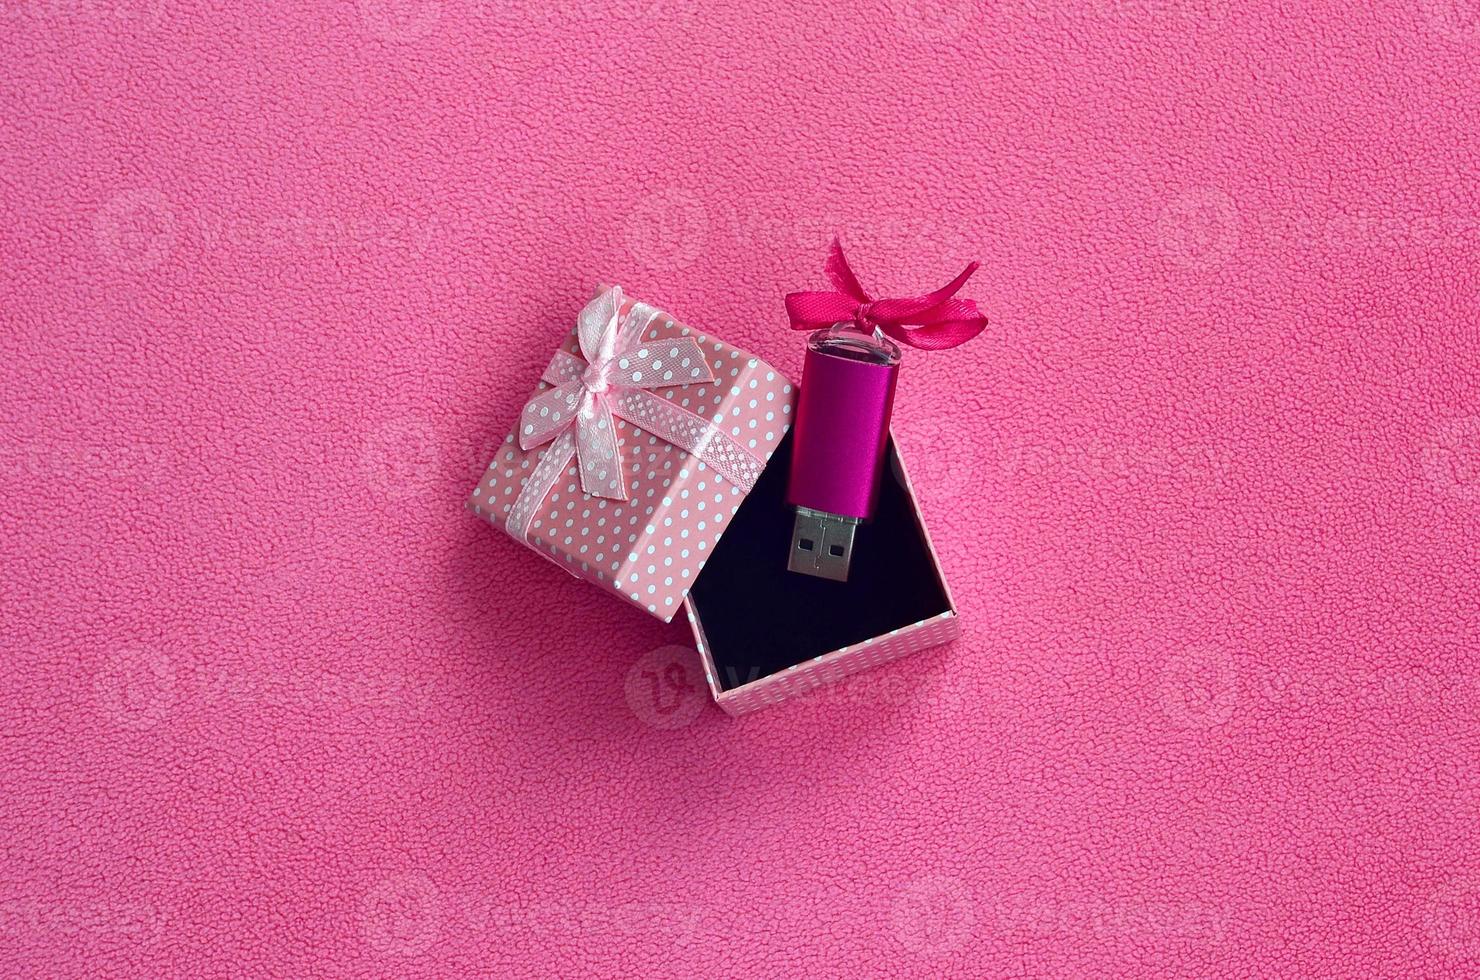 Brilliant pink usb flash memory card with a pink bow lies in a small gift box in pink with a small bow on a blanket of soft and furry light pink fleece fabric. Classic female gift memory card design photo